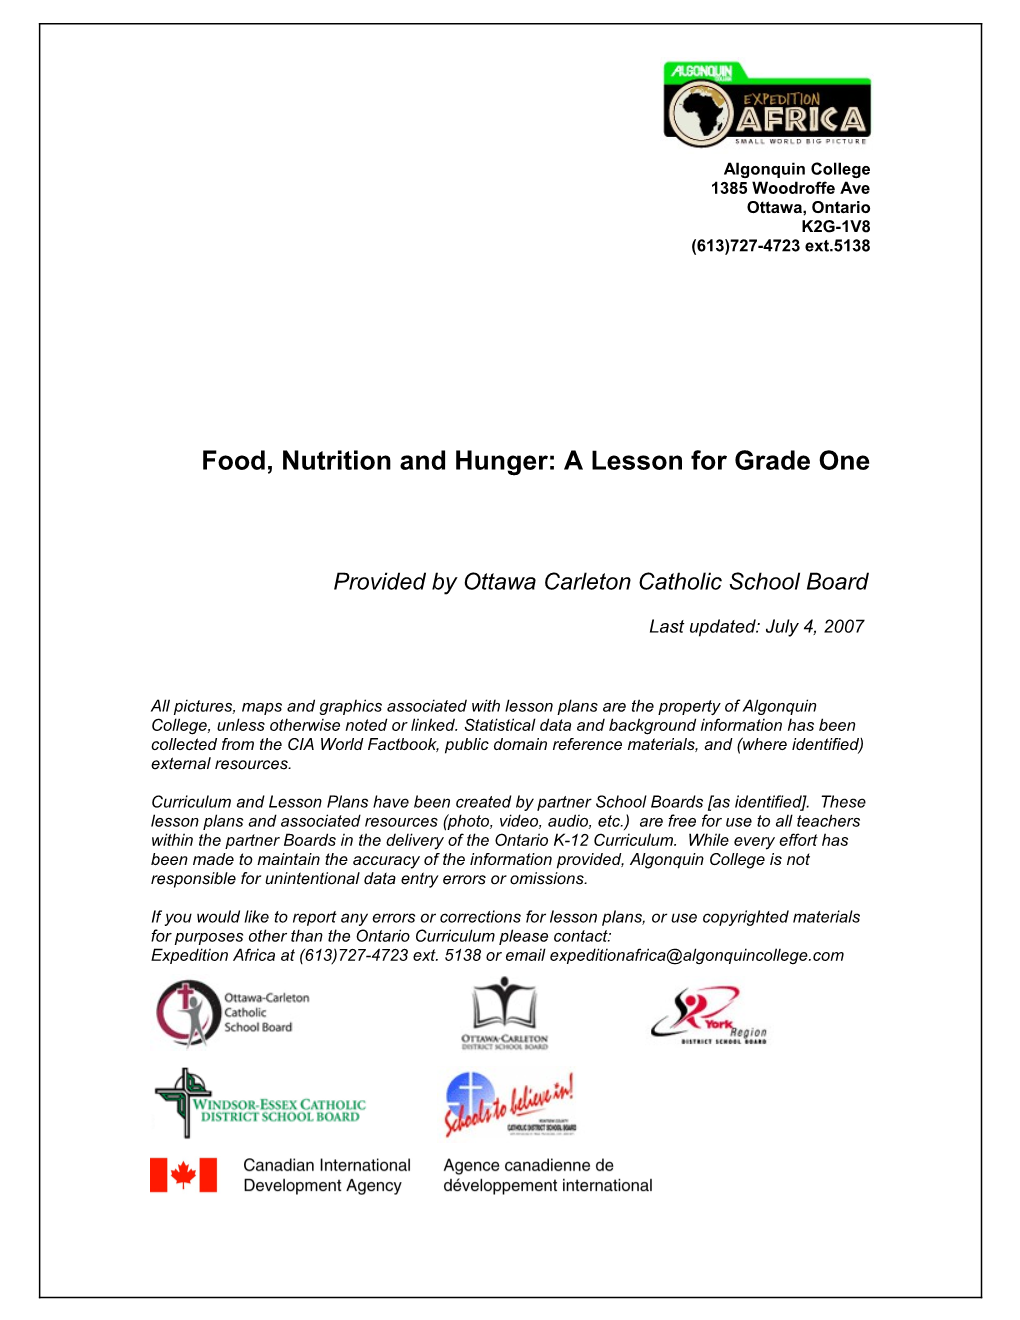 Food, Nutrition and Hunger: a Lesson for Grade One